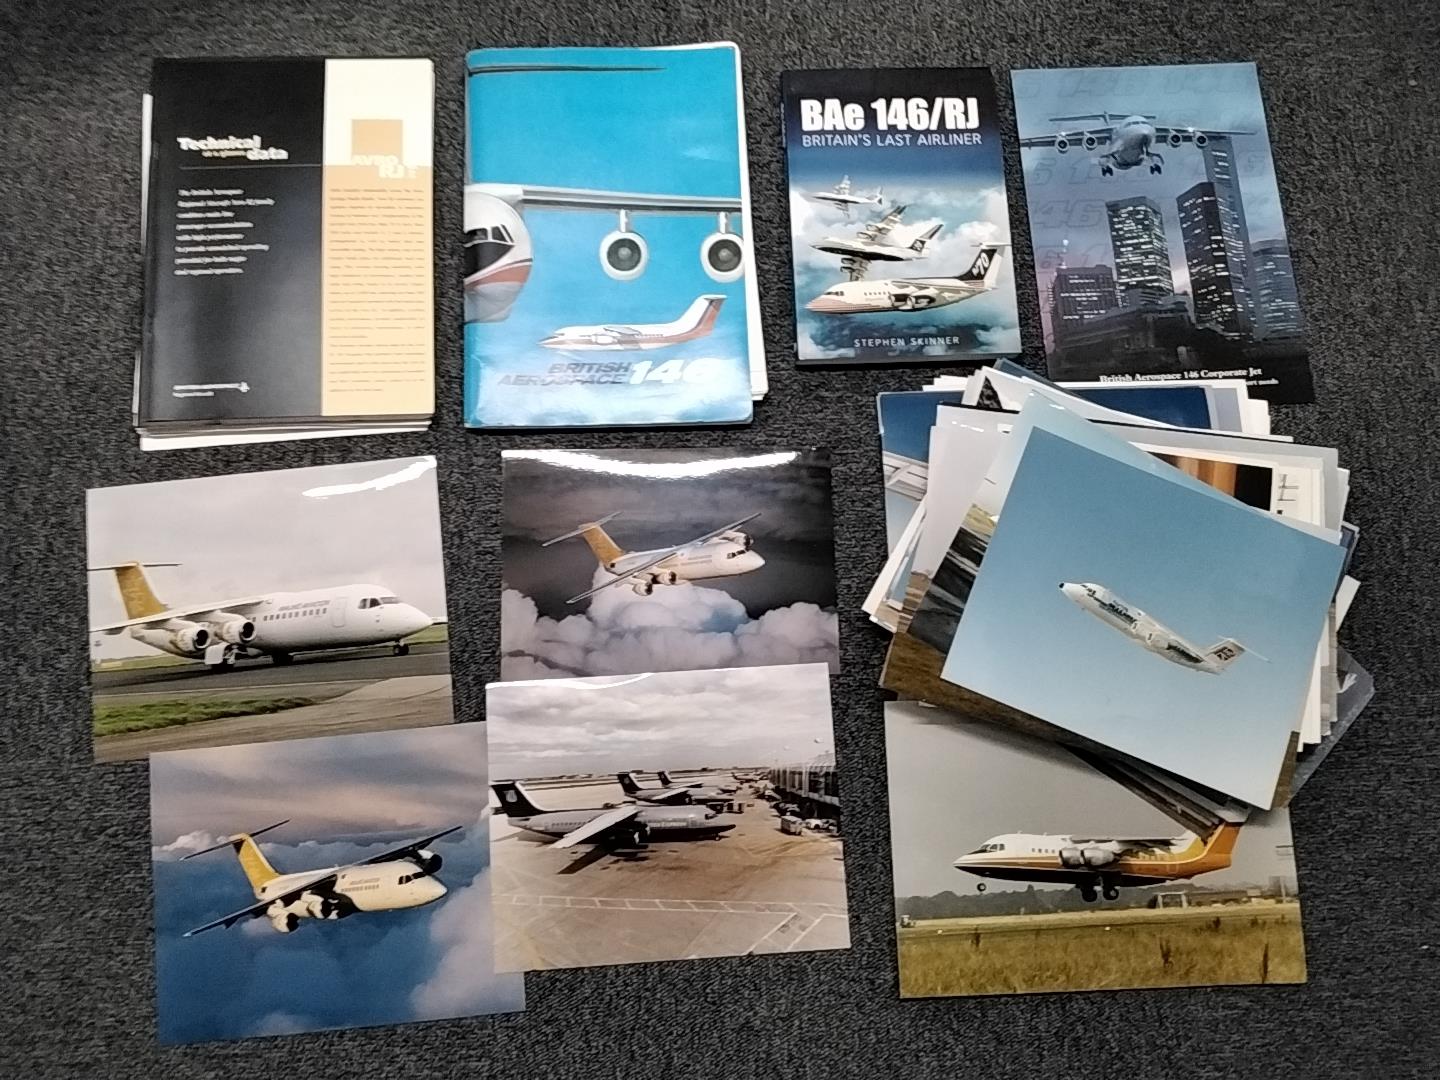 BAe 146 Archive. A comprehensive archive on the British Aerospace 146